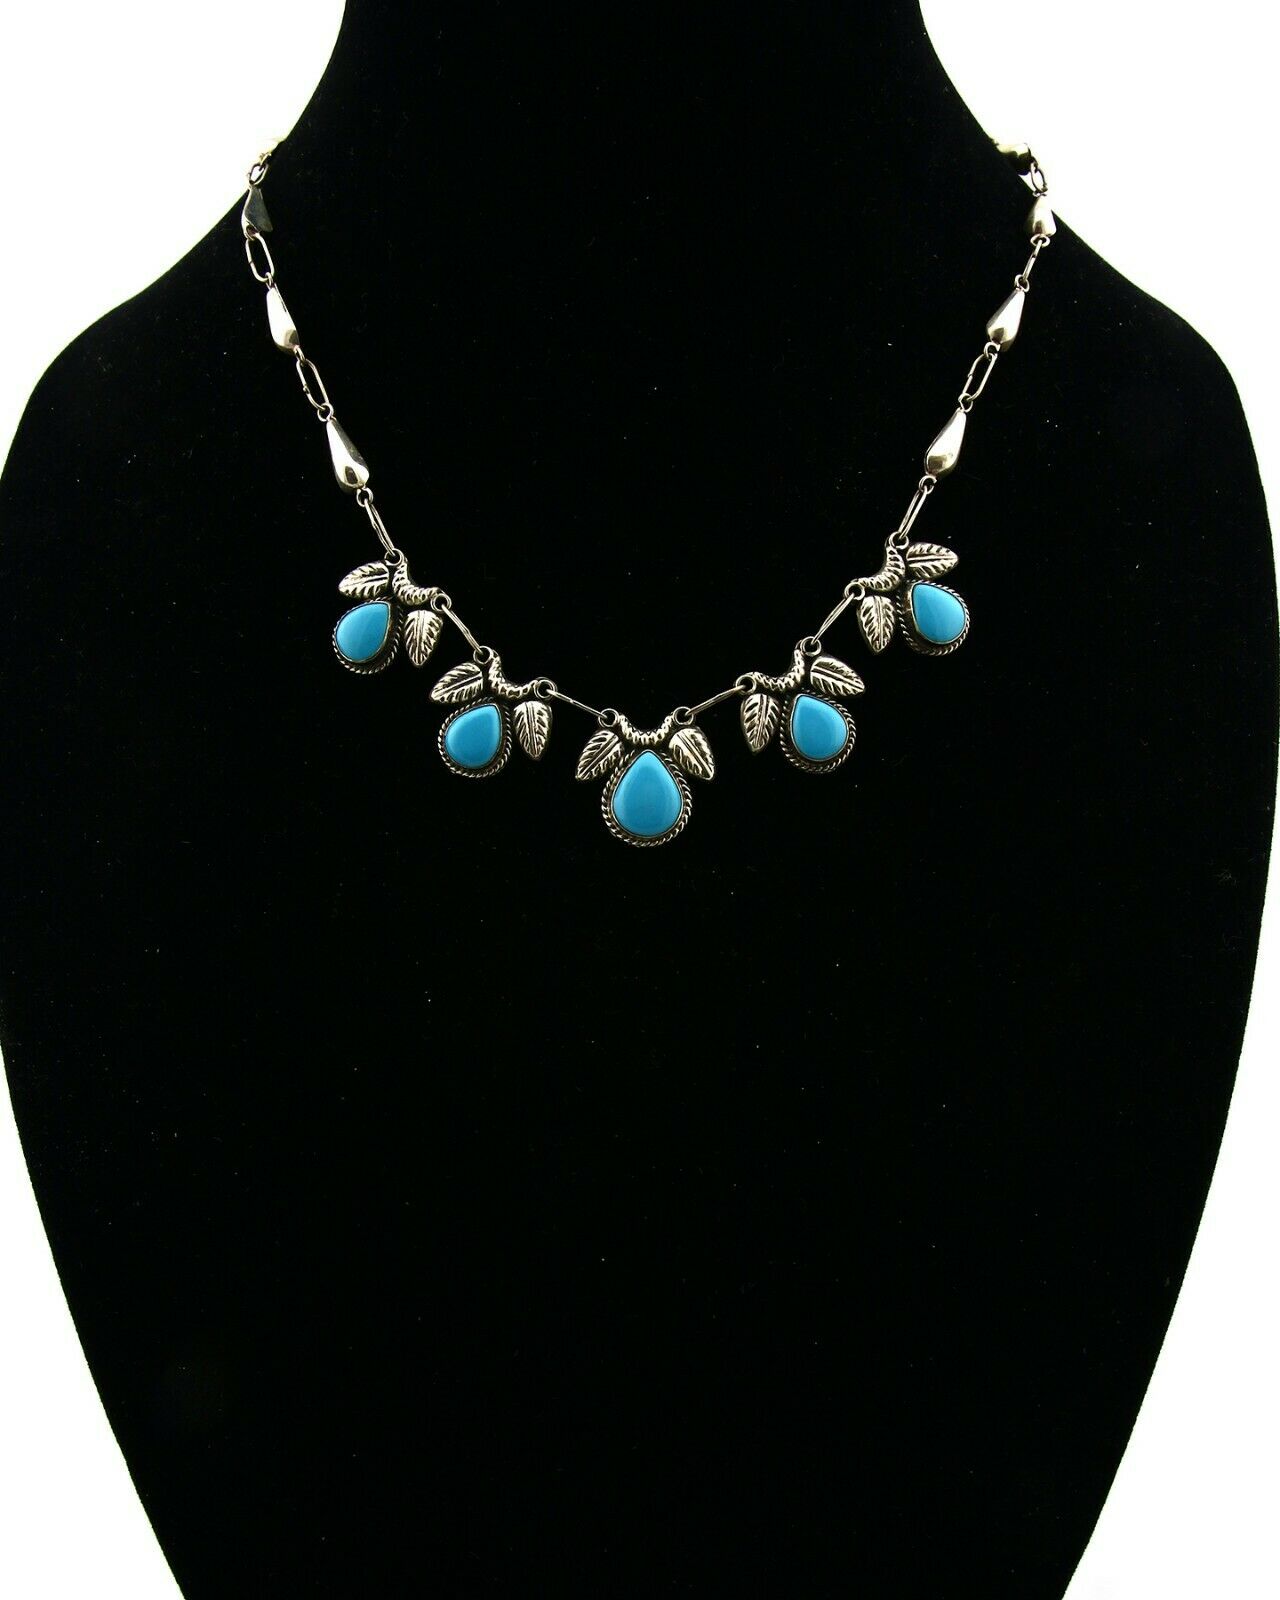 Women's Turquoise Necklace .925 Silver Taxo Mexico Signed GCOI Circa 1980's